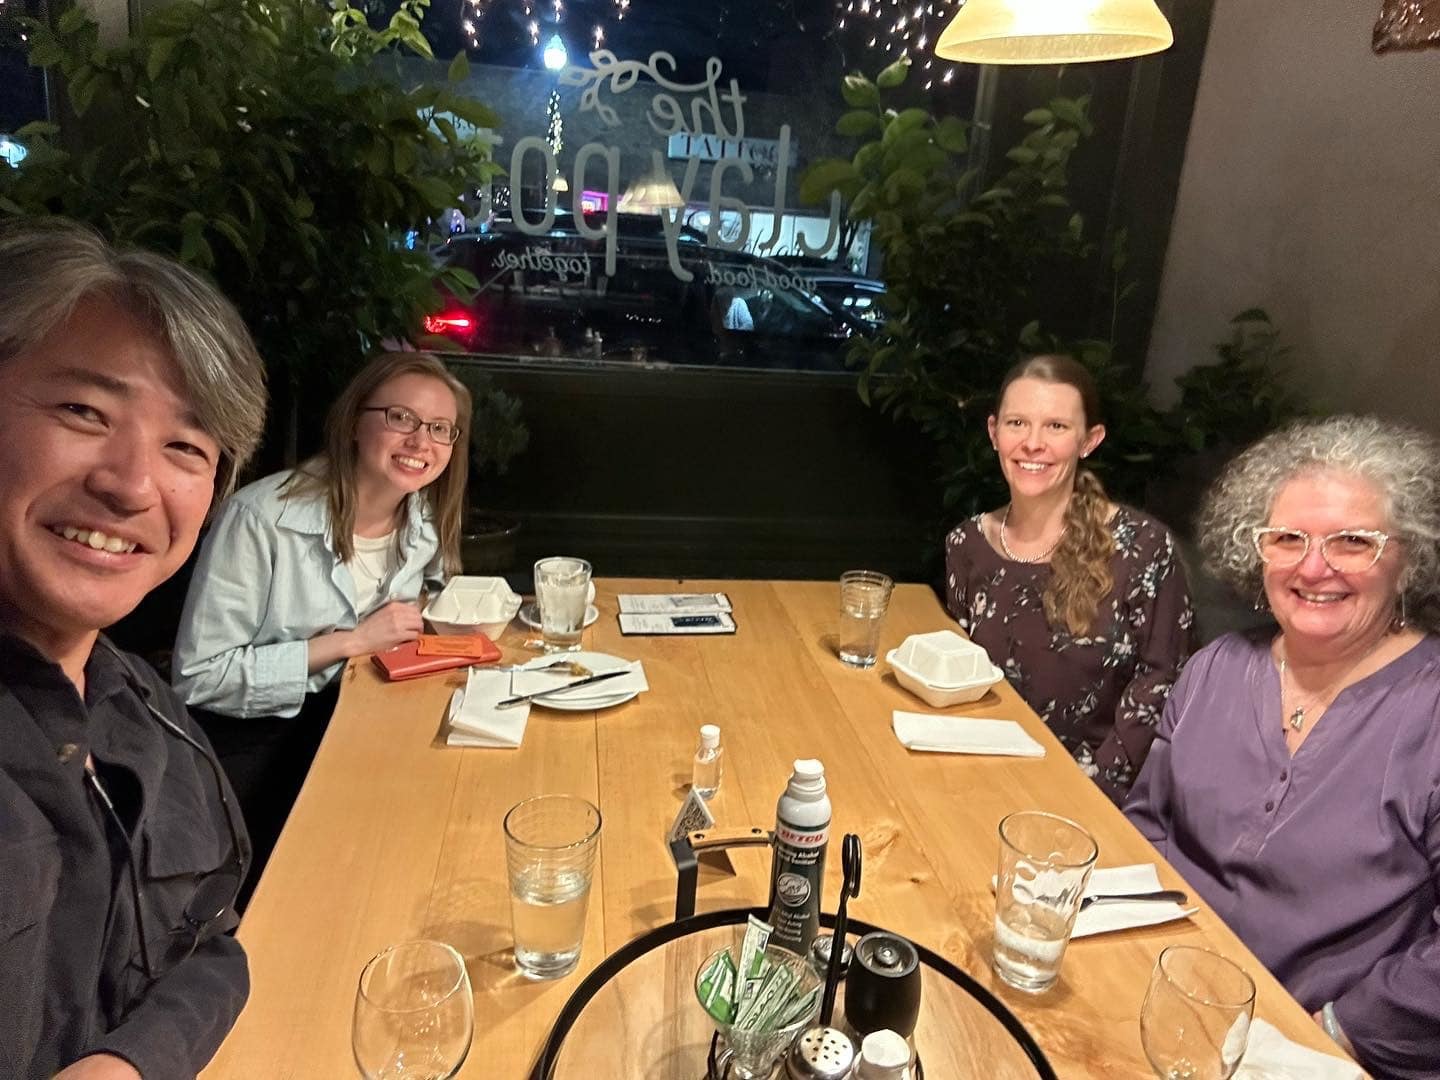  A photo of Paul Kei Matsuda having dinner with T/ESOL and UWP faculty at Clay Pot. Left to right: Paul Kei Matsuda, Anastasiia Kryzhanivska, Amy Cook, Lucinda Hunter